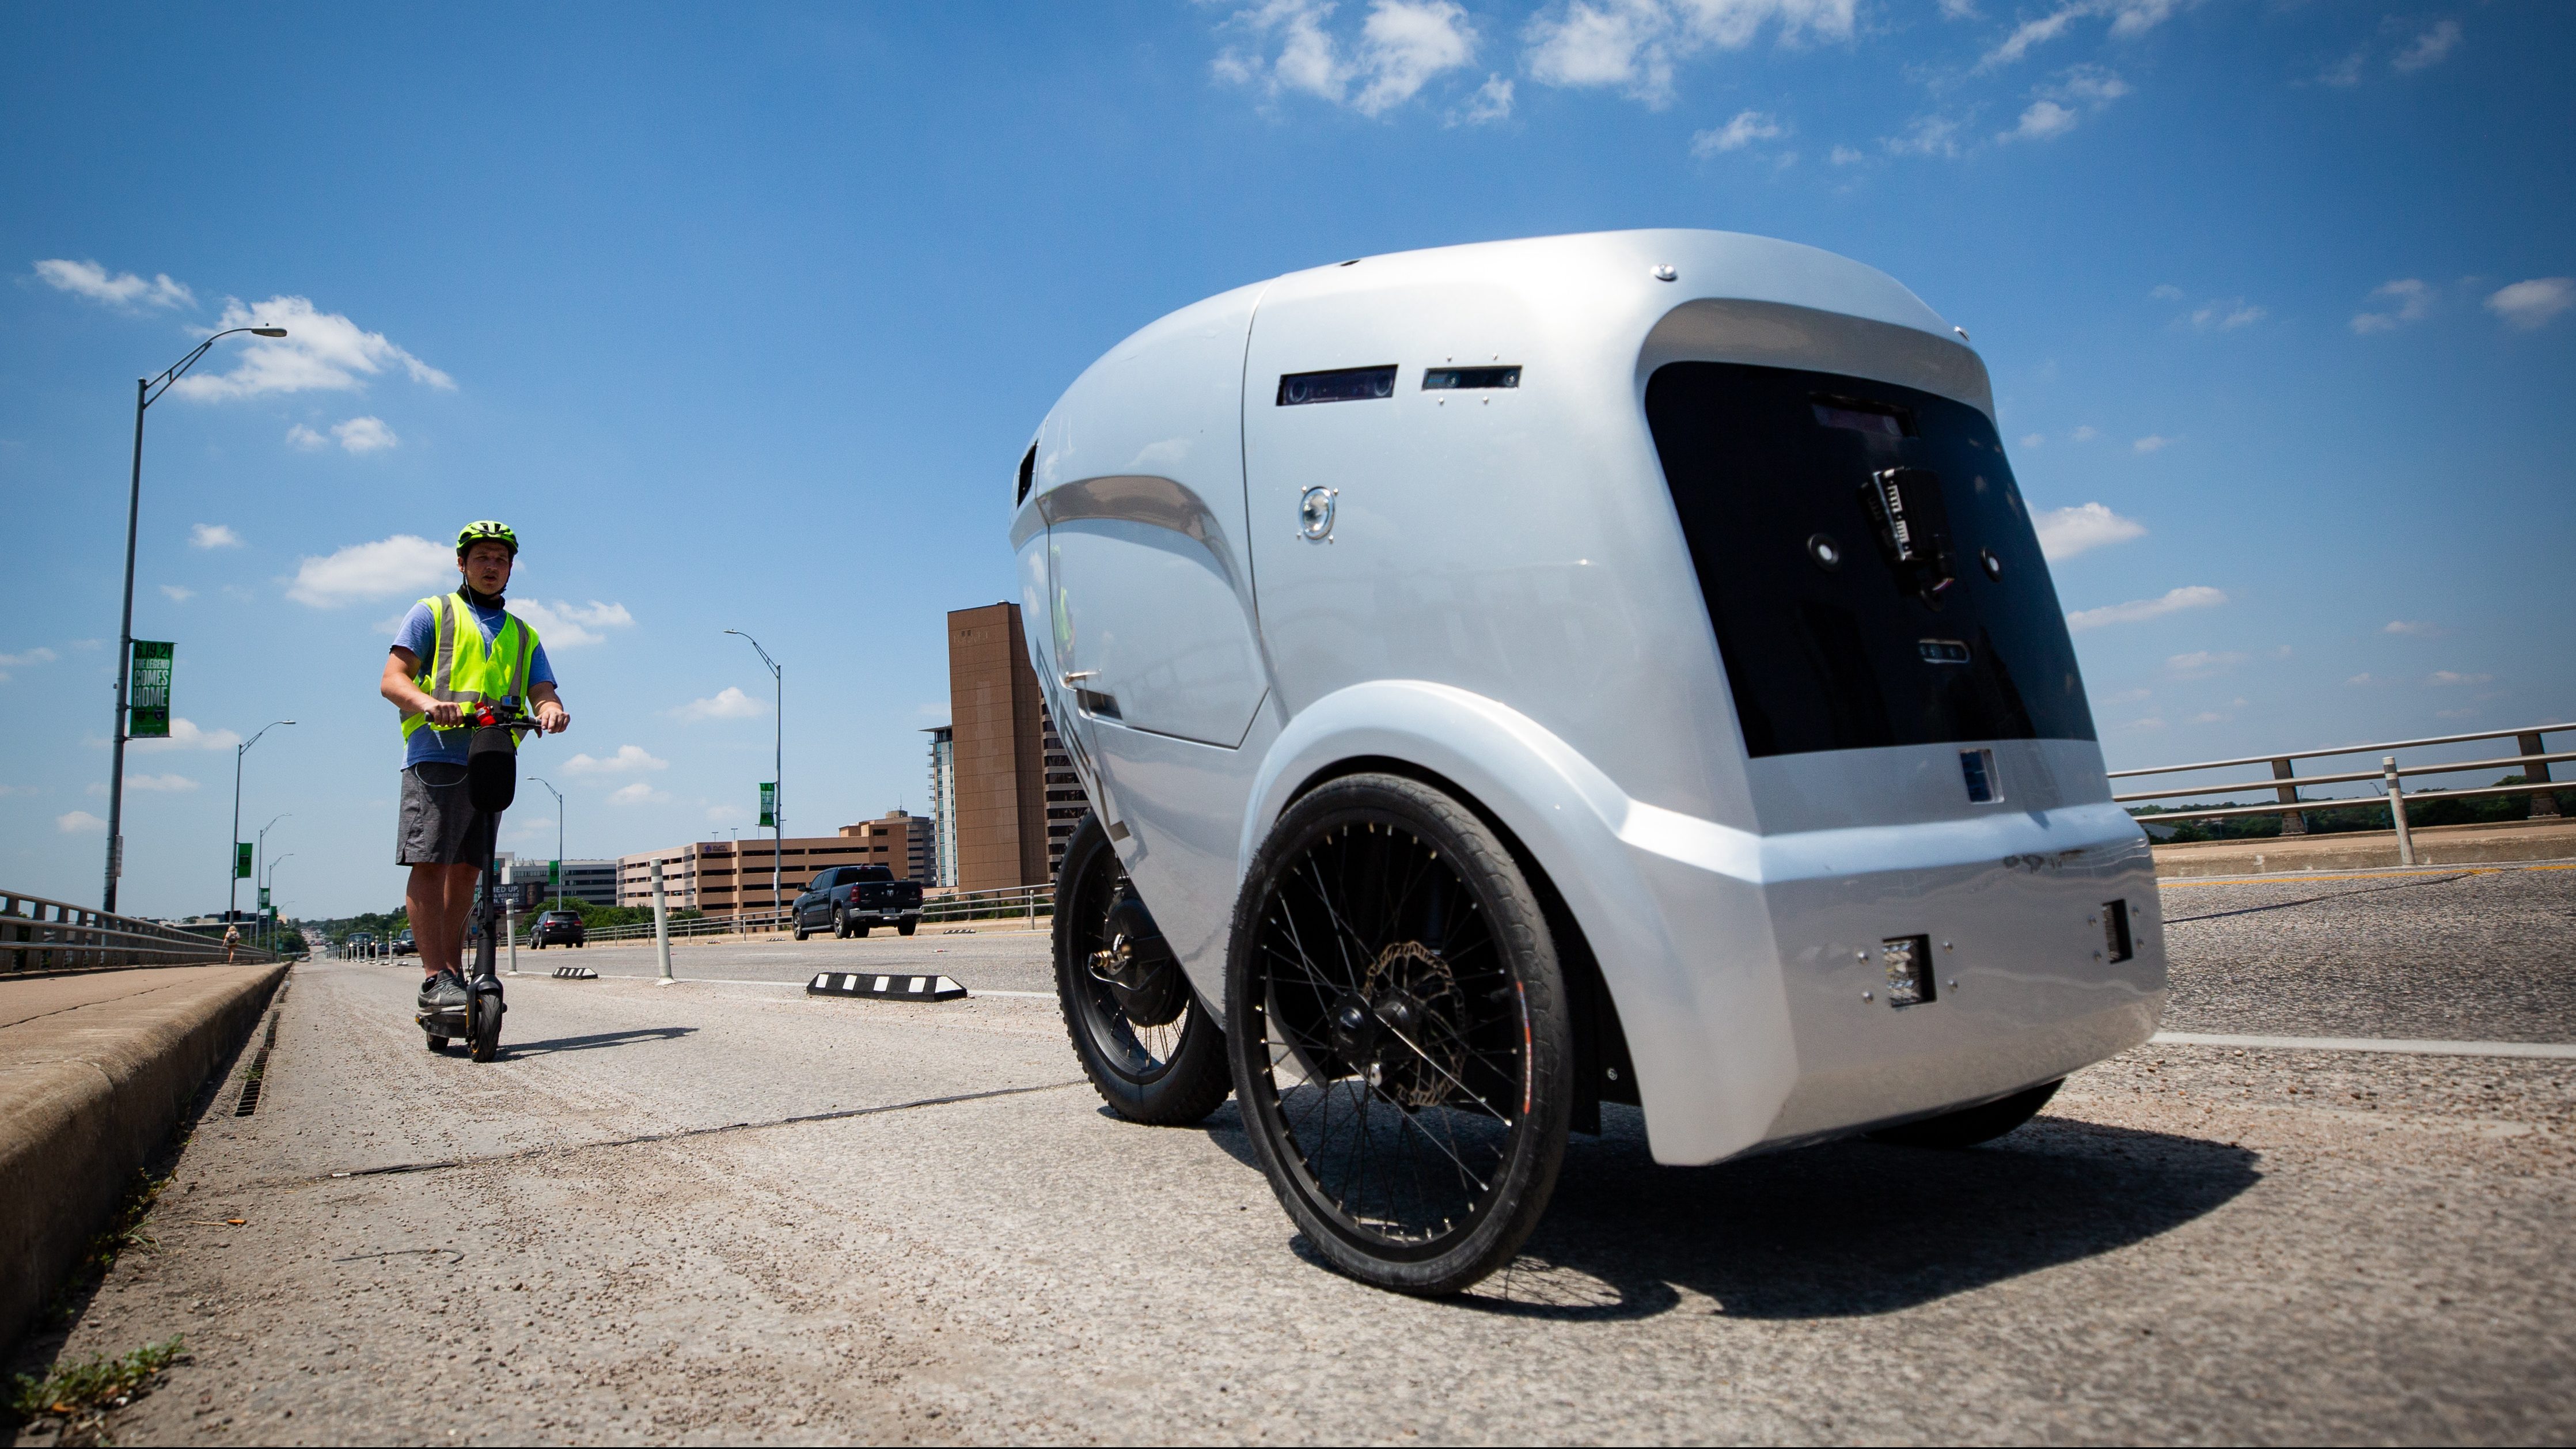 Food Delivery Robots Are Ridiculously Cute—By Design